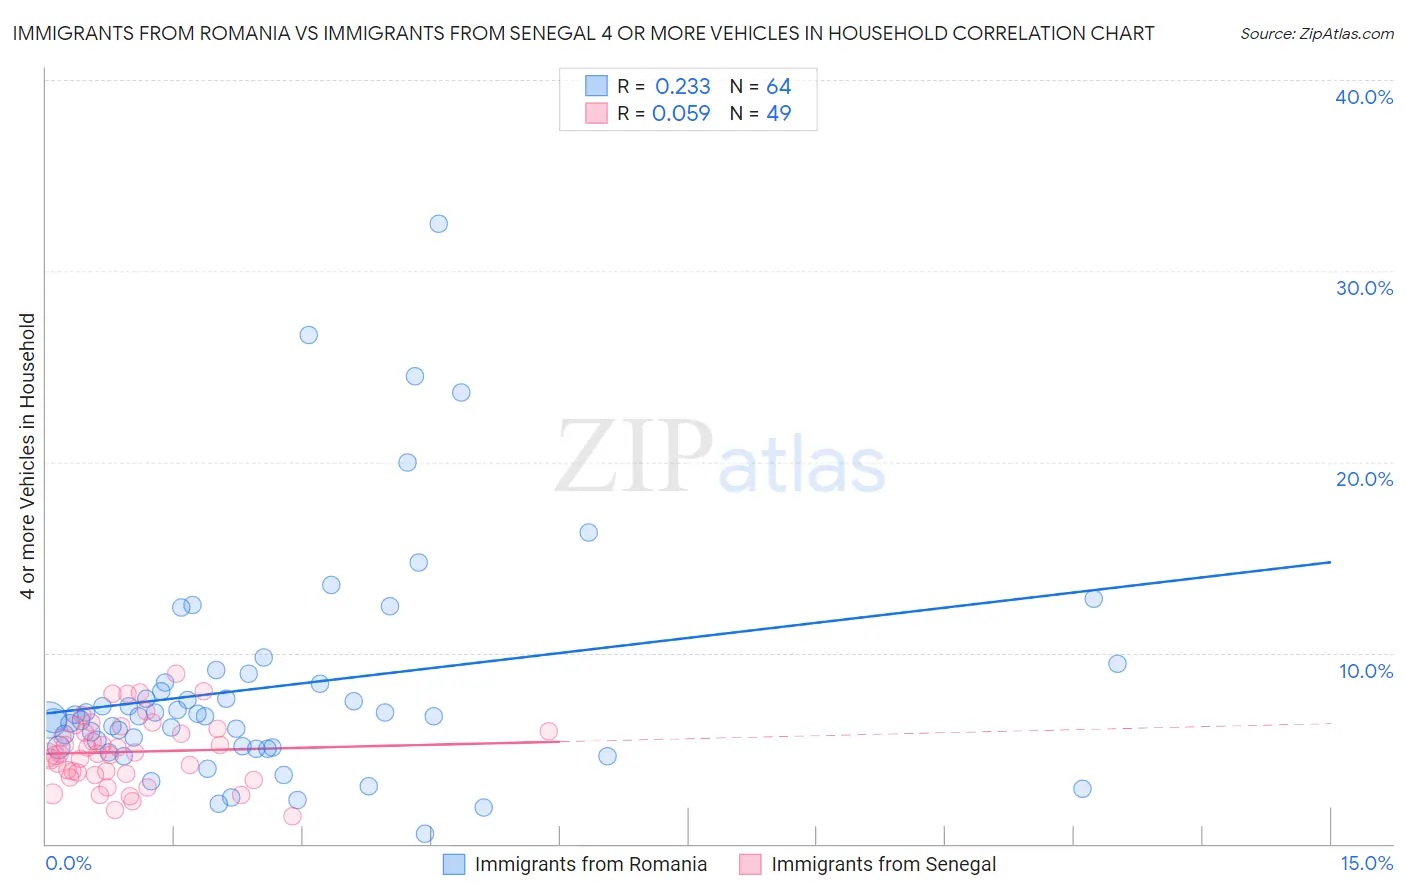 Immigrants from Romania vs Immigrants from Senegal 4 or more Vehicles in Household